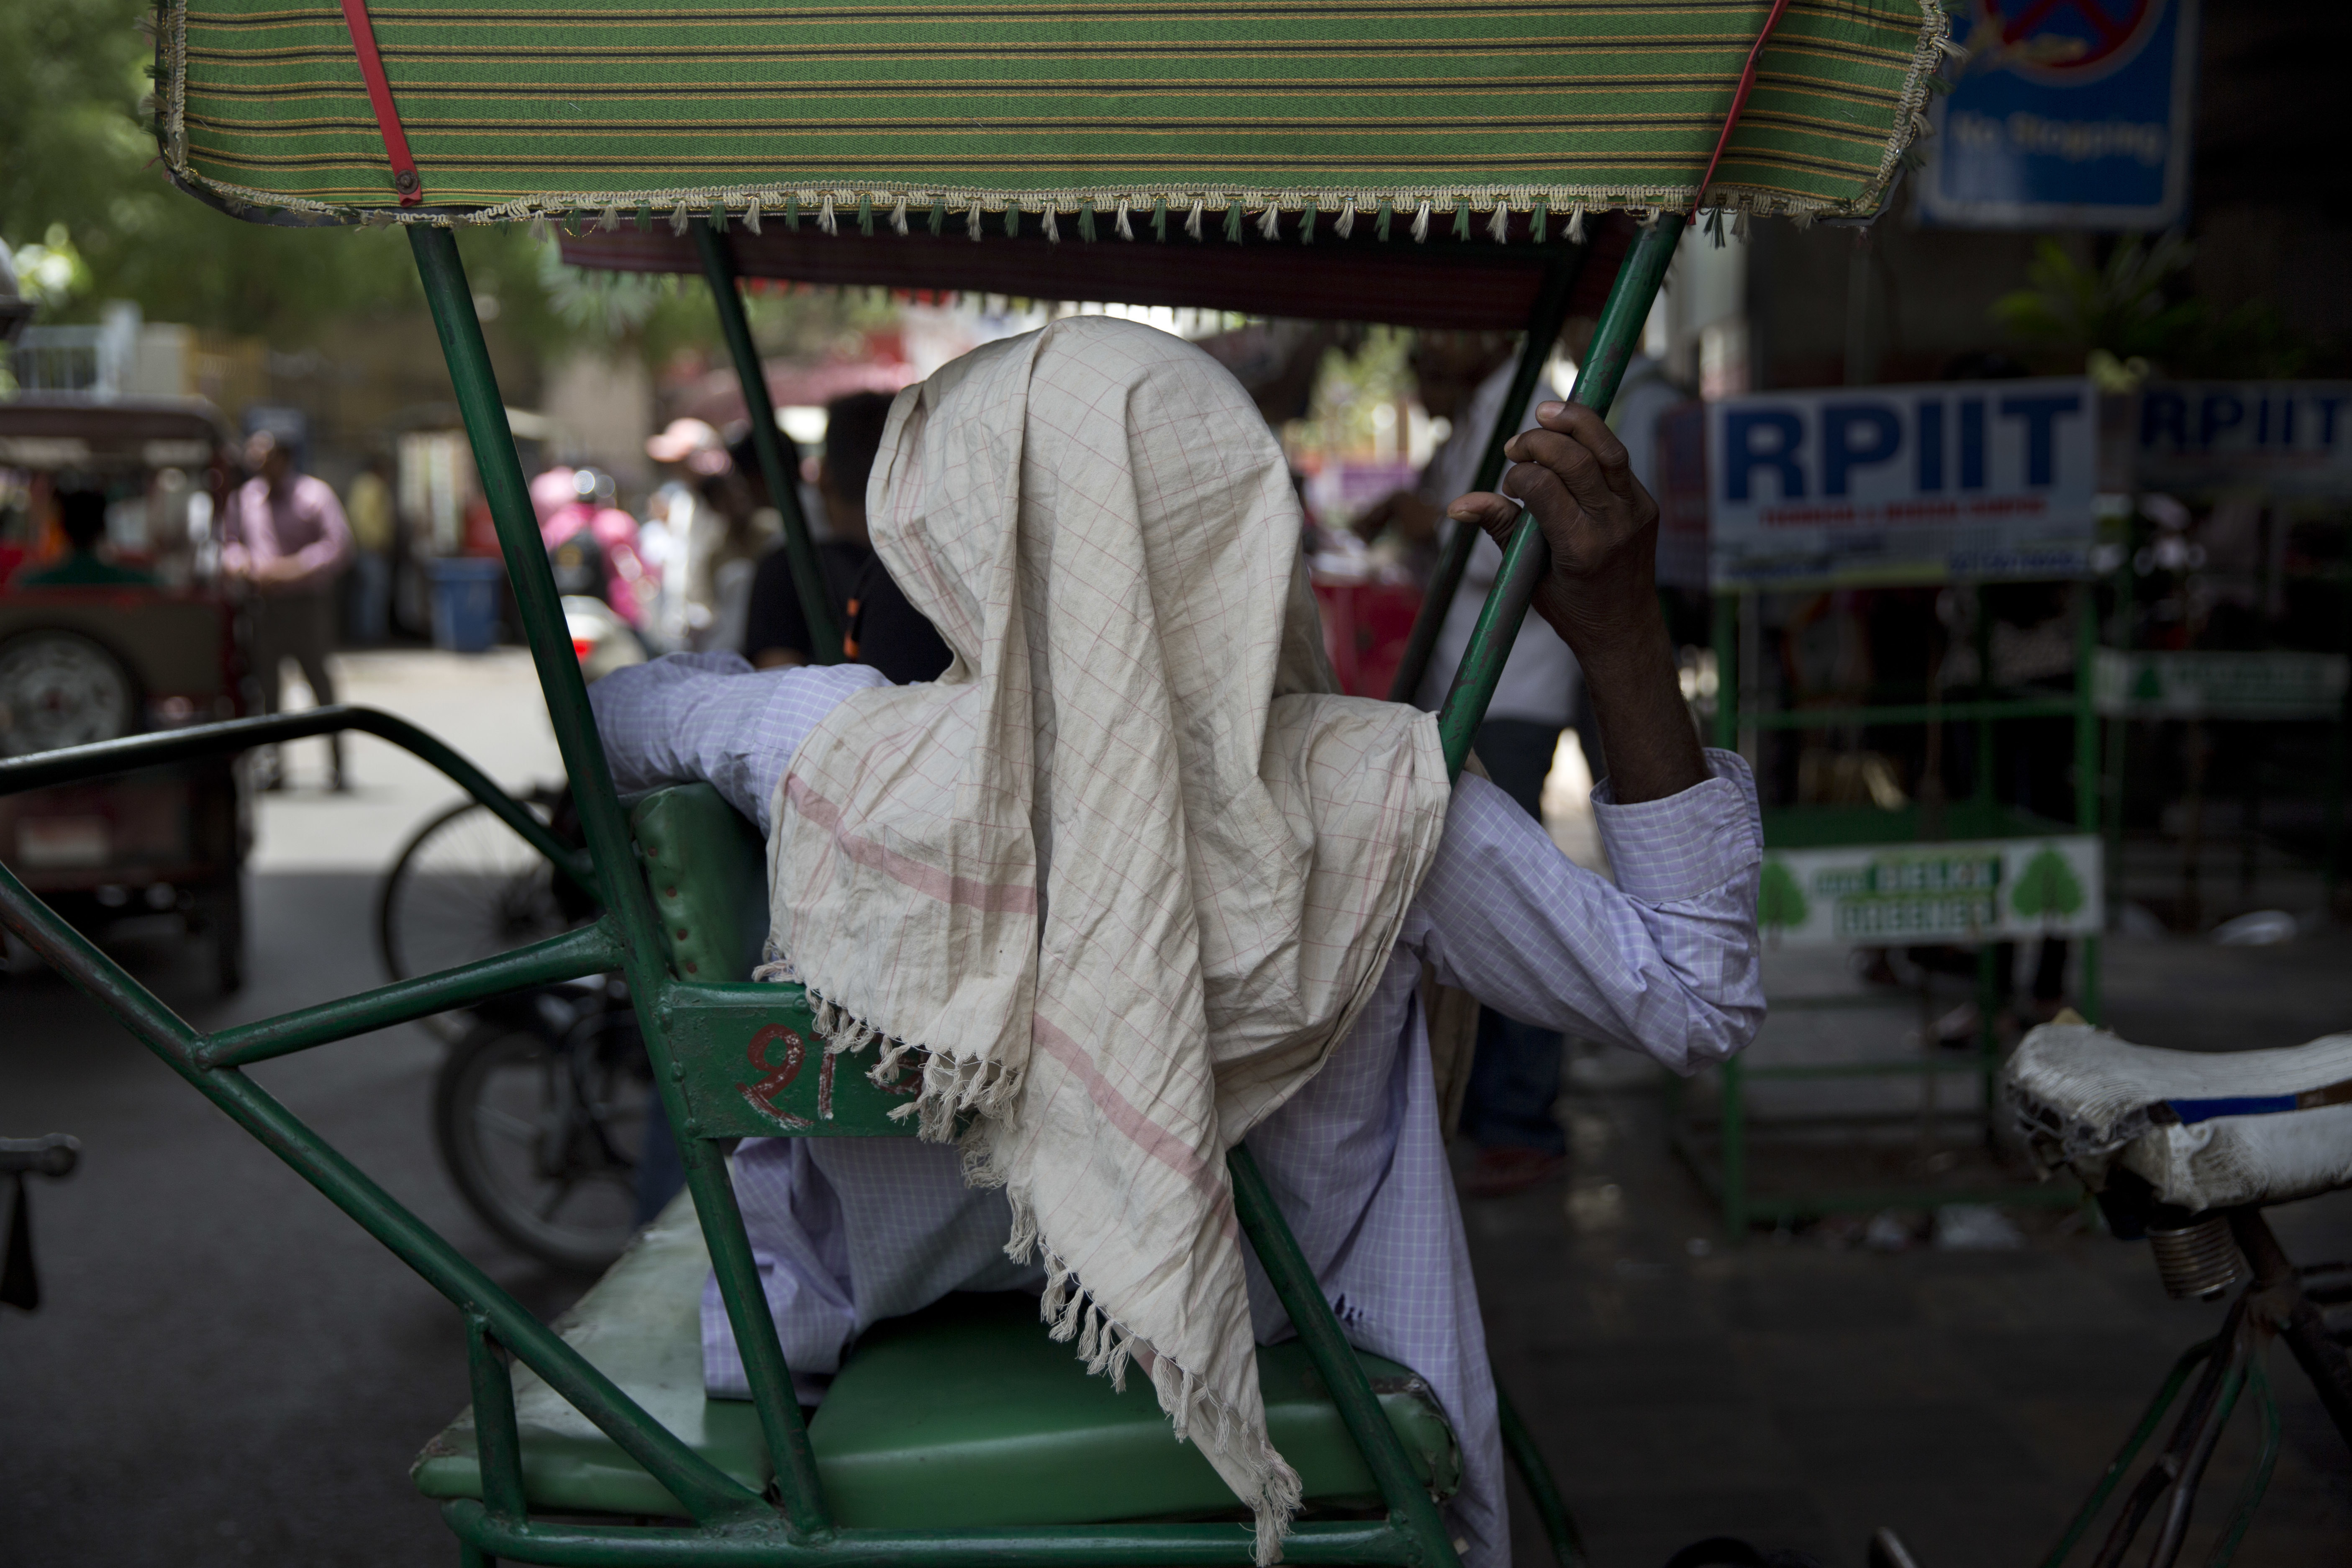 An Indian rickshaw puller with his head wrapped in a scarf to wipe sweat, waits for customers on hot day in New Delhi, India, Monday, June 5, 2017. Most parts of northern India is reeling under intense heat wave conditions with the temperature crossing over 43 degrees Celsius (109.4 Fahrenheit).(AP Photo/Tsering Topgyal)